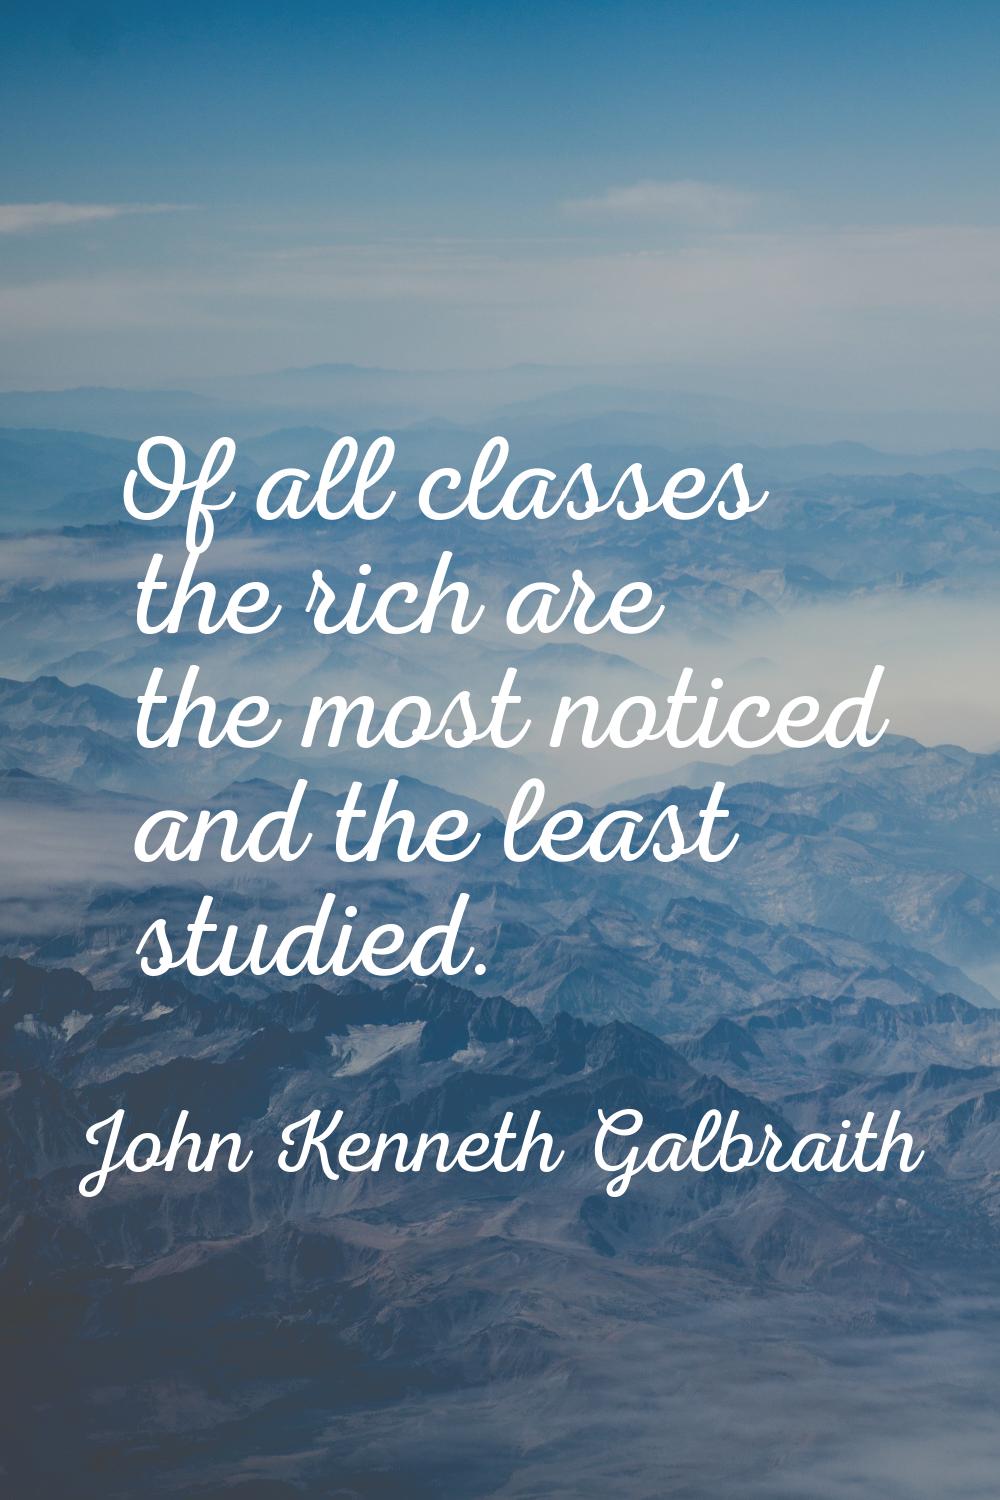 Of all classes the rich are the most noticed and the least studied.